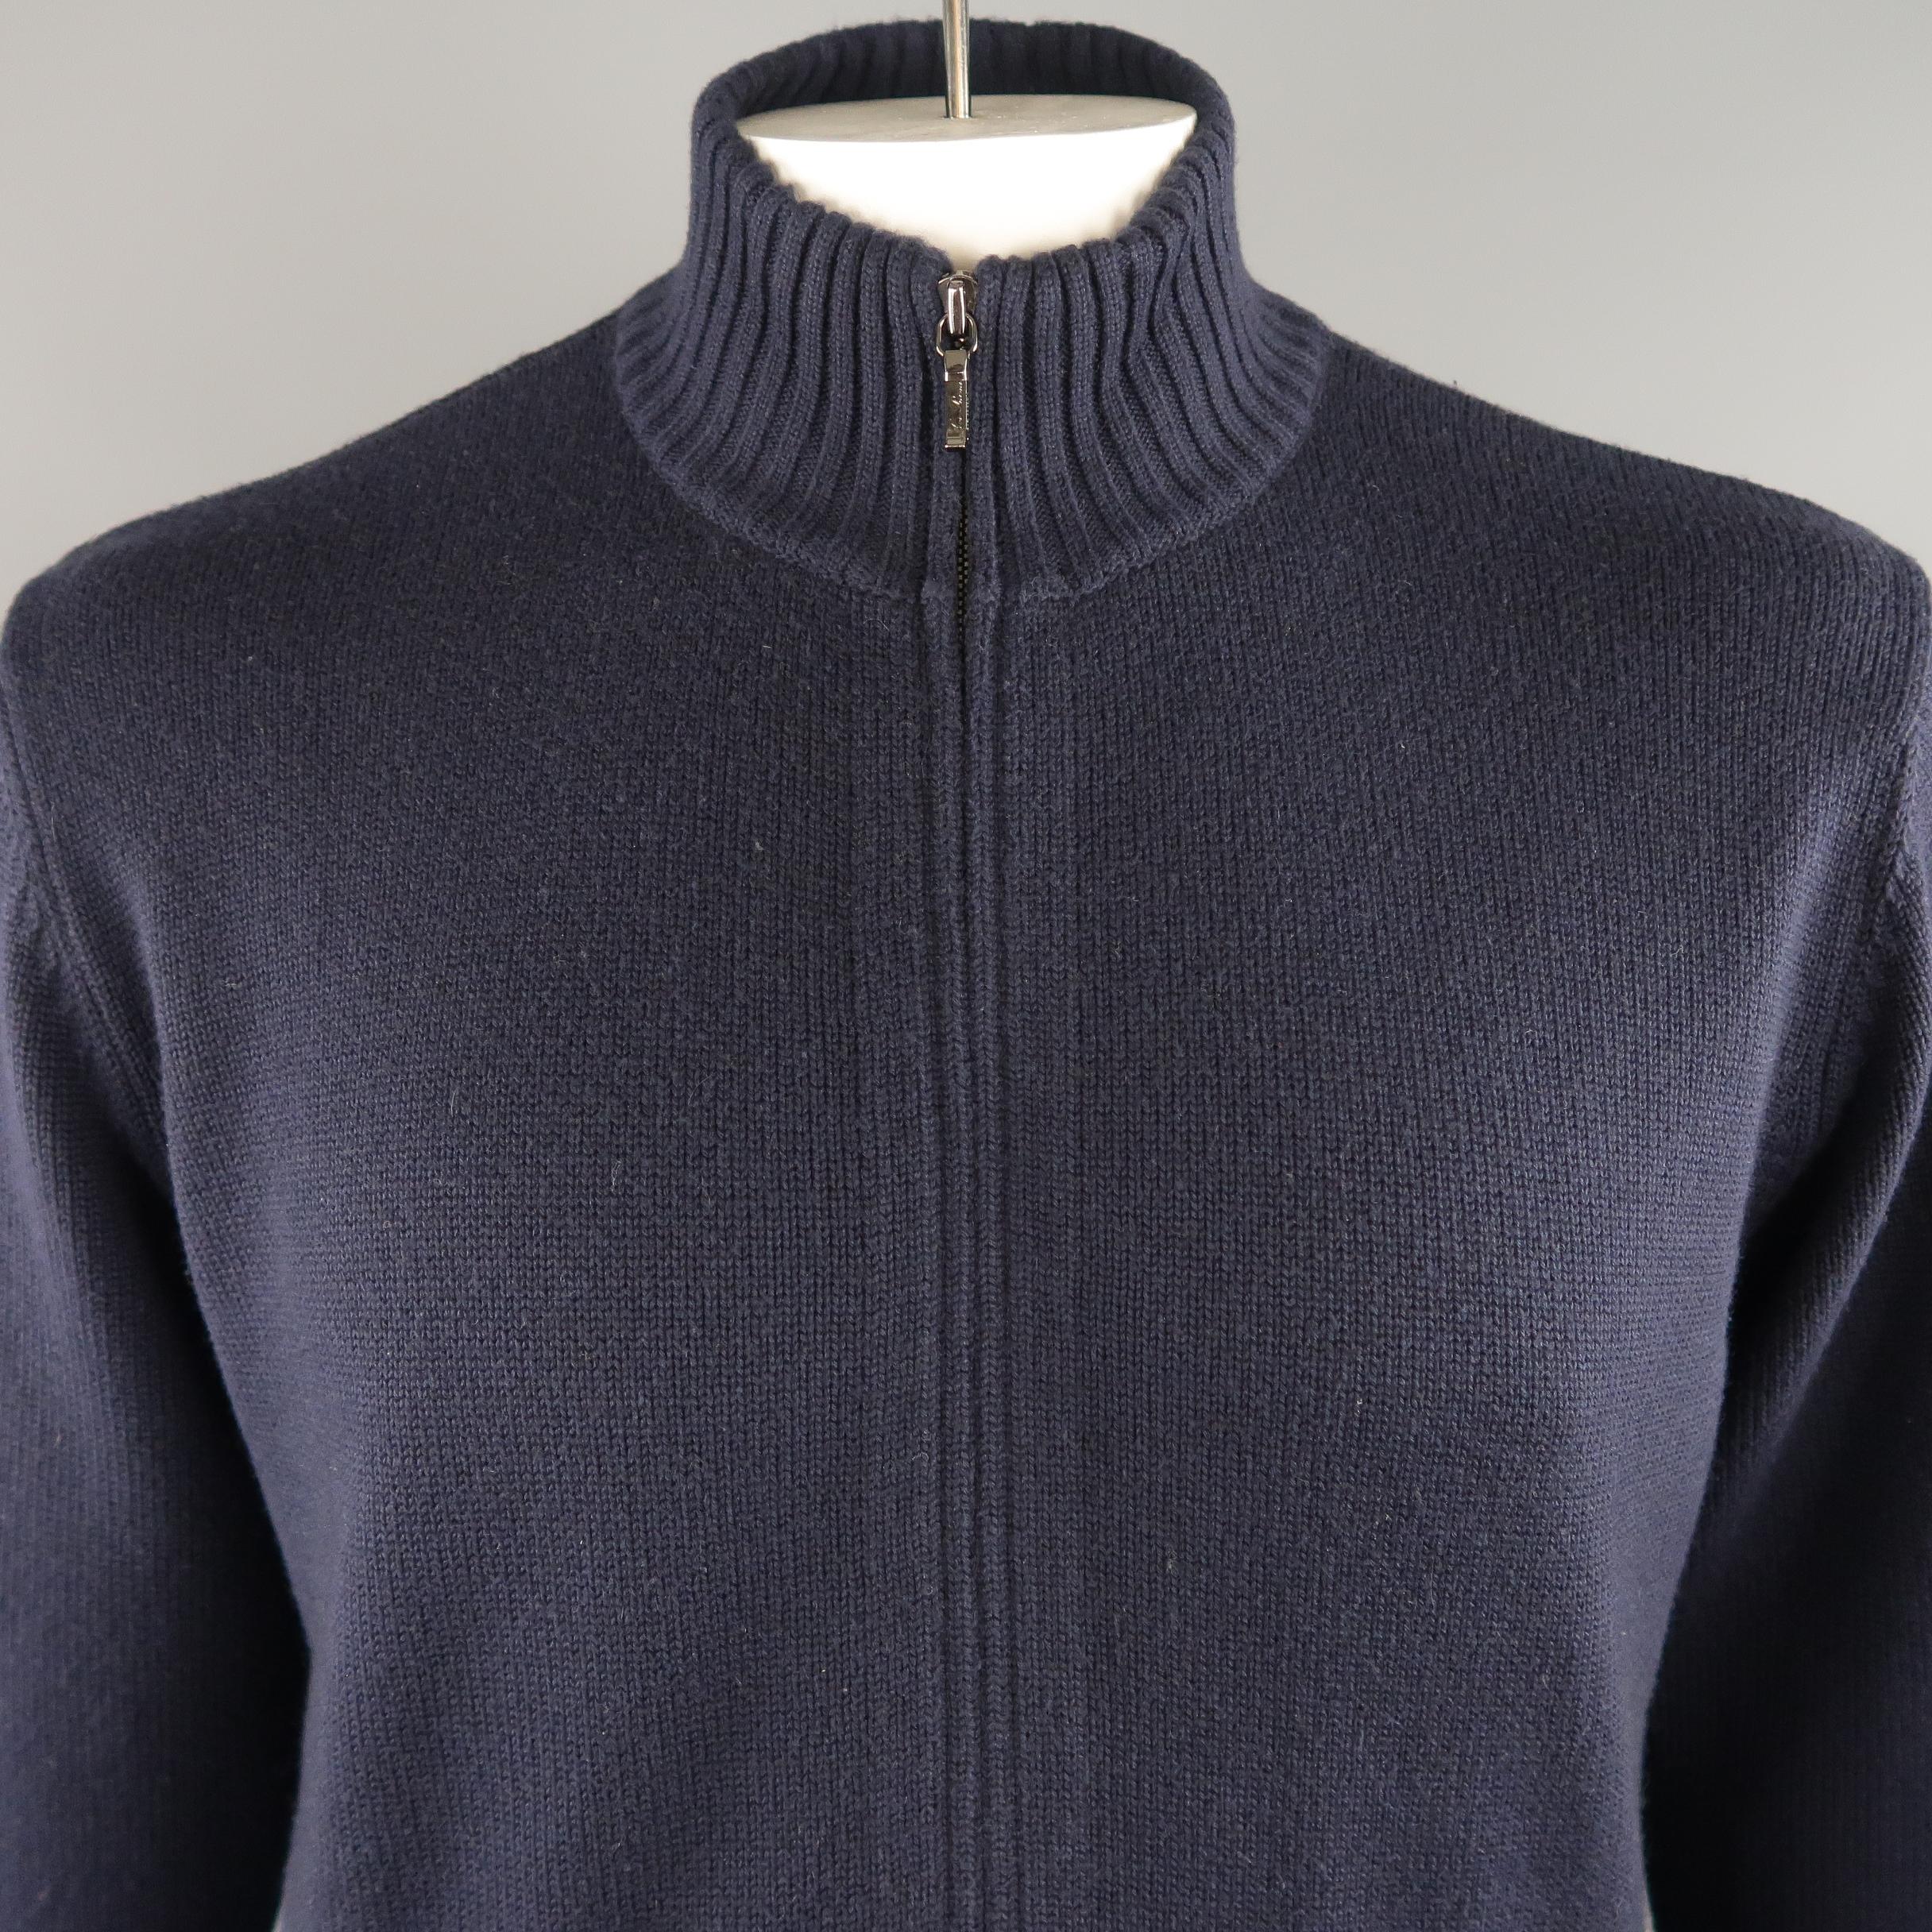 LORO PIANA jacket comes in navy tone in knitted cashmere / cotton material, with zip up front, front pockets, ribbed cuffs and waistband. Very light mark of use on the left cuff. Made in Italy.
 
Excellent Pre-Owned Condition.
Marked: 52 IT
